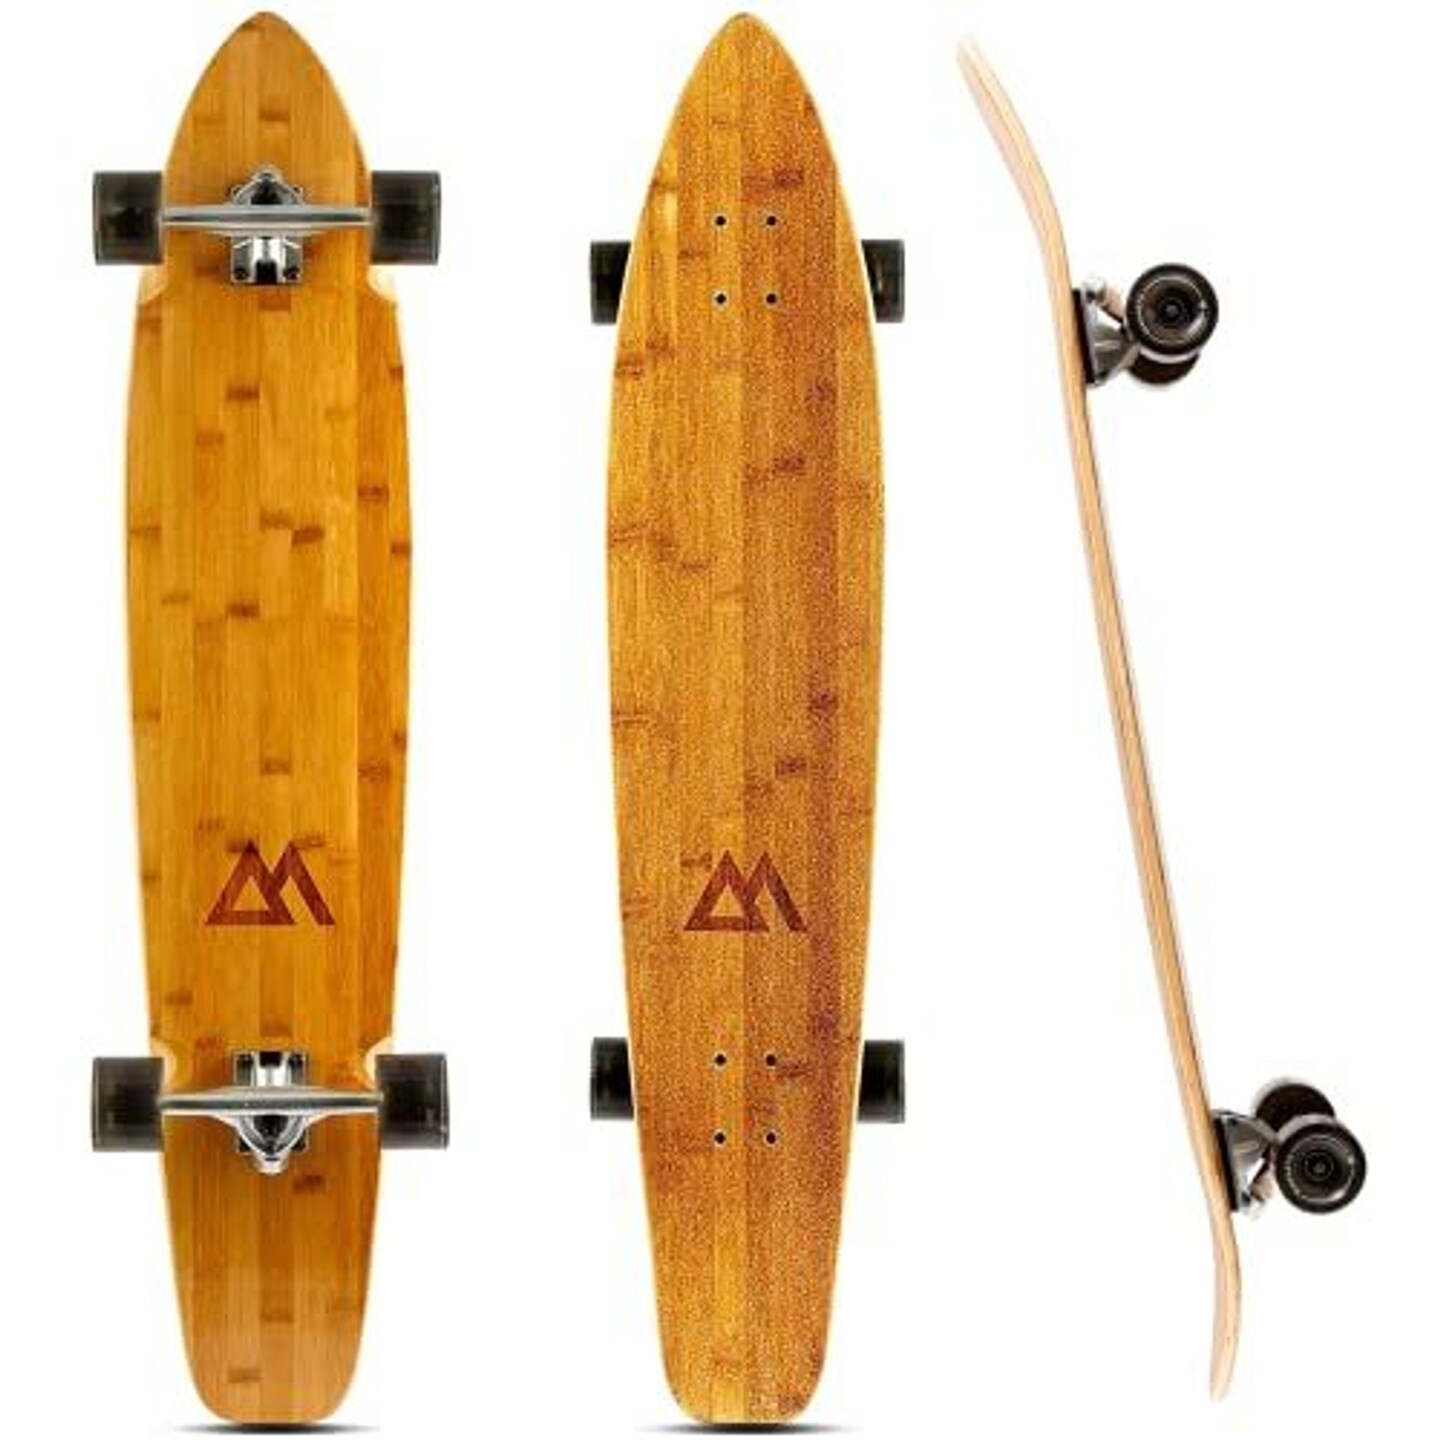 Magneto 44-inch Kicktail Cruiser Longboard Skateboard - Bamboo &#x26; Canadian Maple Deck - Ideal for Commuting, Cruising, Carving, Downhill Riding - Suitable for Adults, Teens &#x26; Kids (Black)